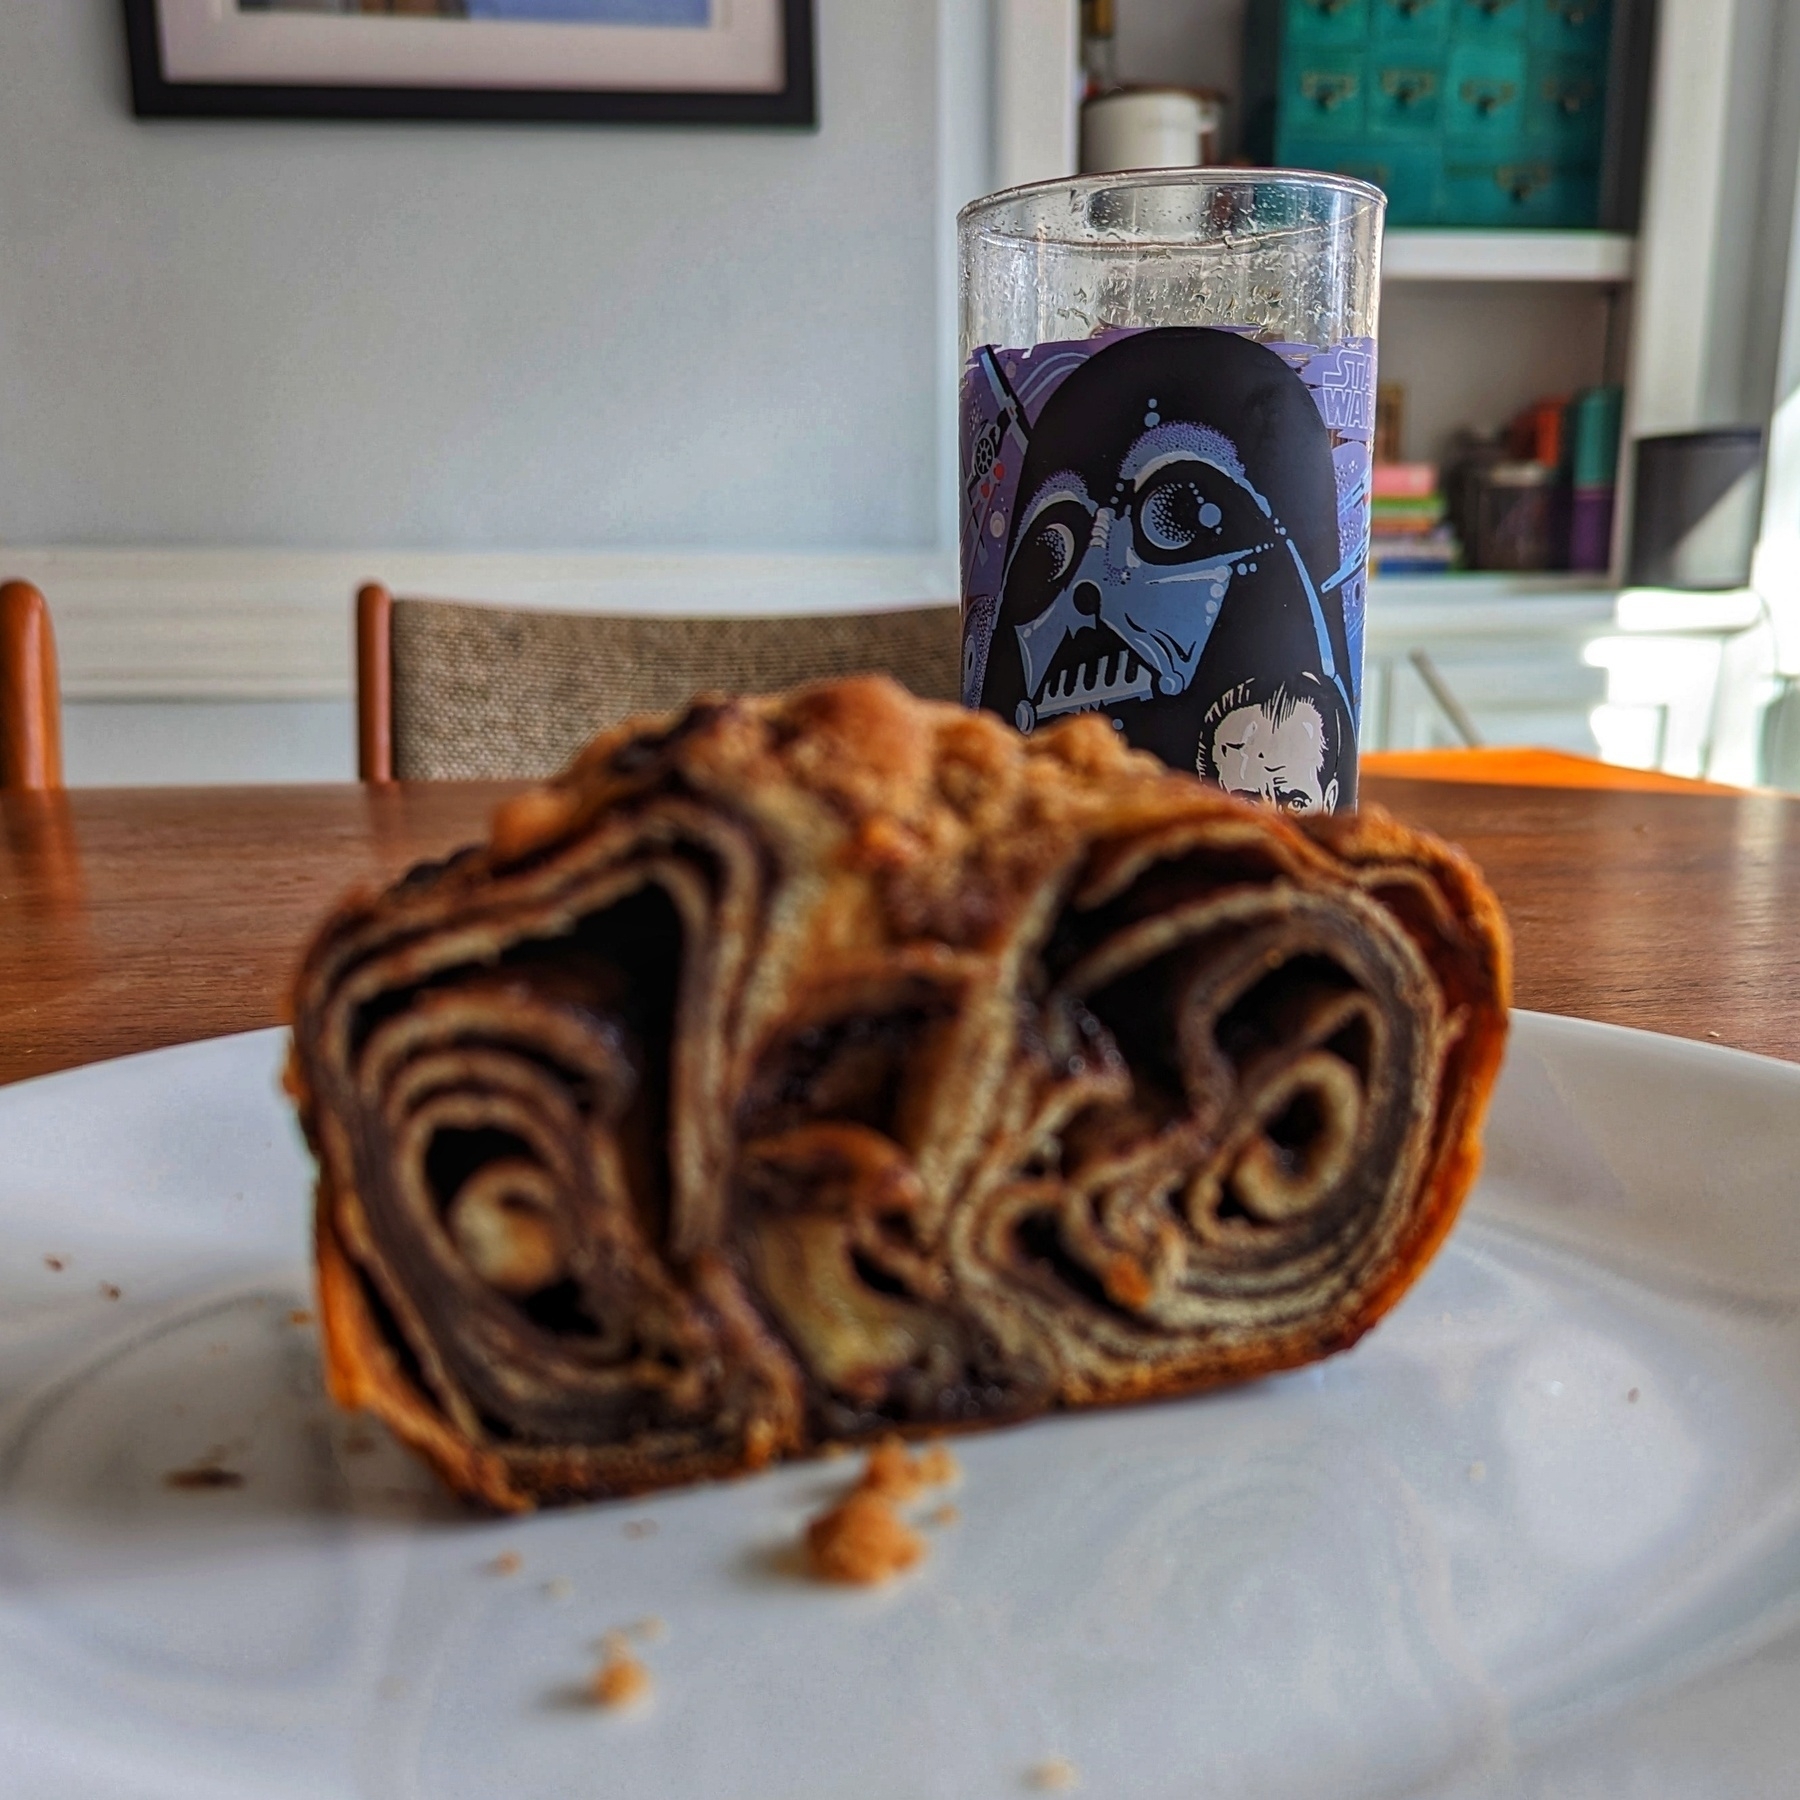 Chocolate babka on a plate in front of a glass with a picture of Darth Vader on it.